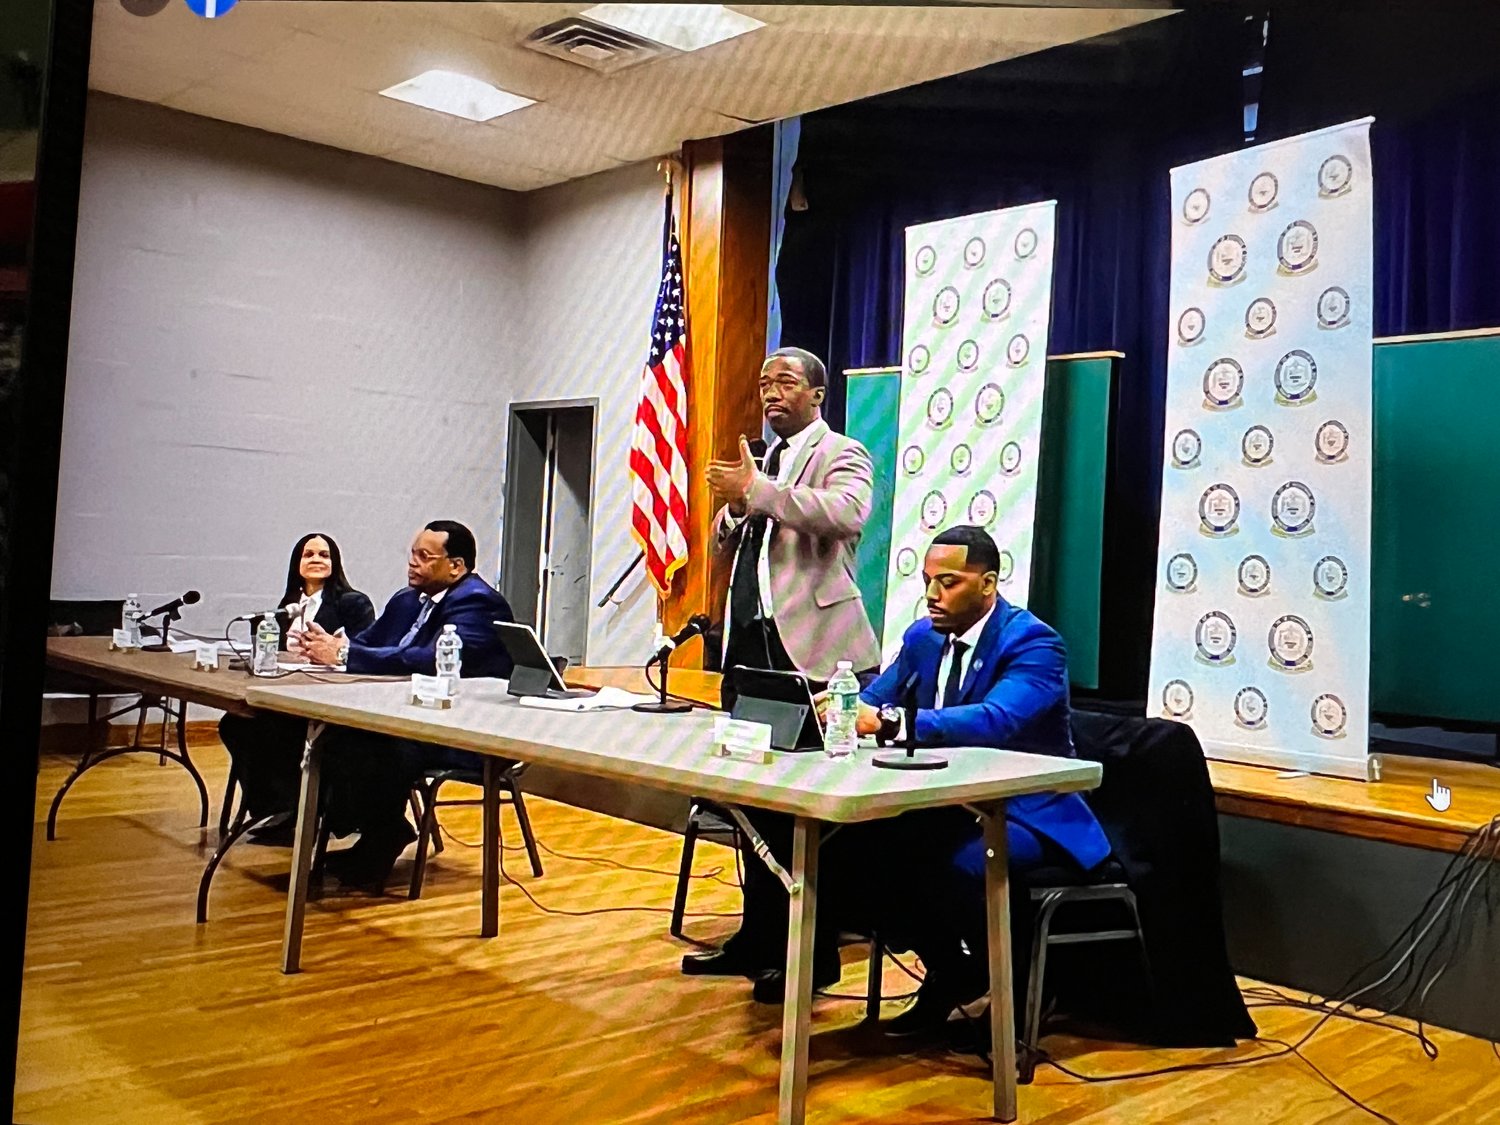 Candidates for two village trustee seats answered questions at a forum in Kennedy Park on March 6. L-R, Dr. Joylette Williams, Lamont E. Johnson, Deputy Mayor Jeffery Daniels, and Trustee Noah Burroughs.